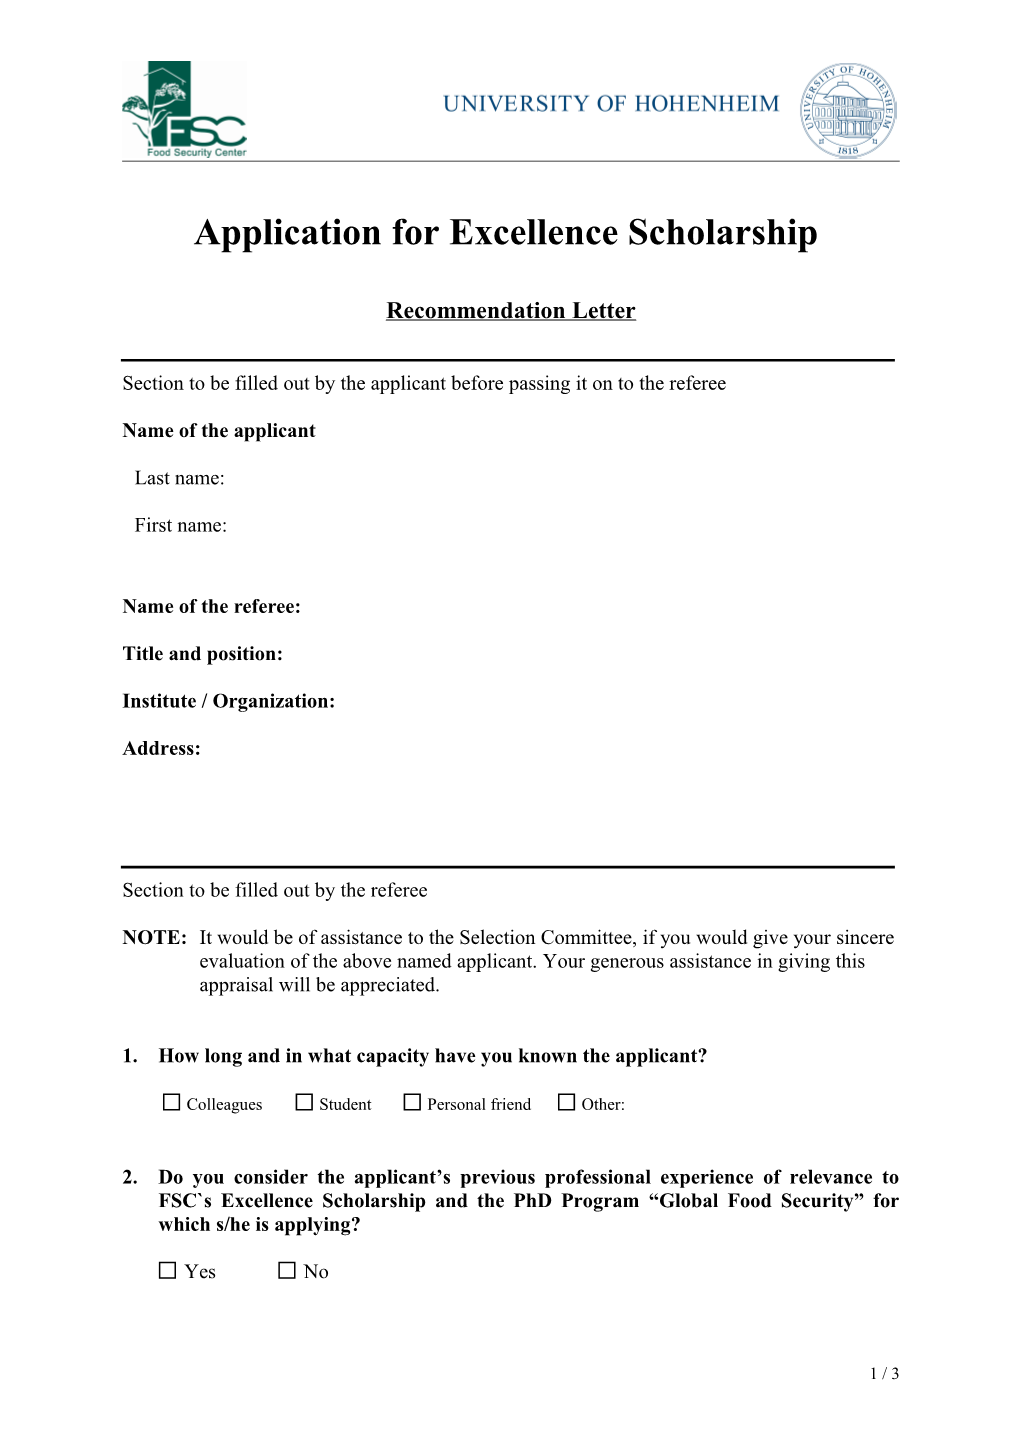 Application for Excellence Scholarship